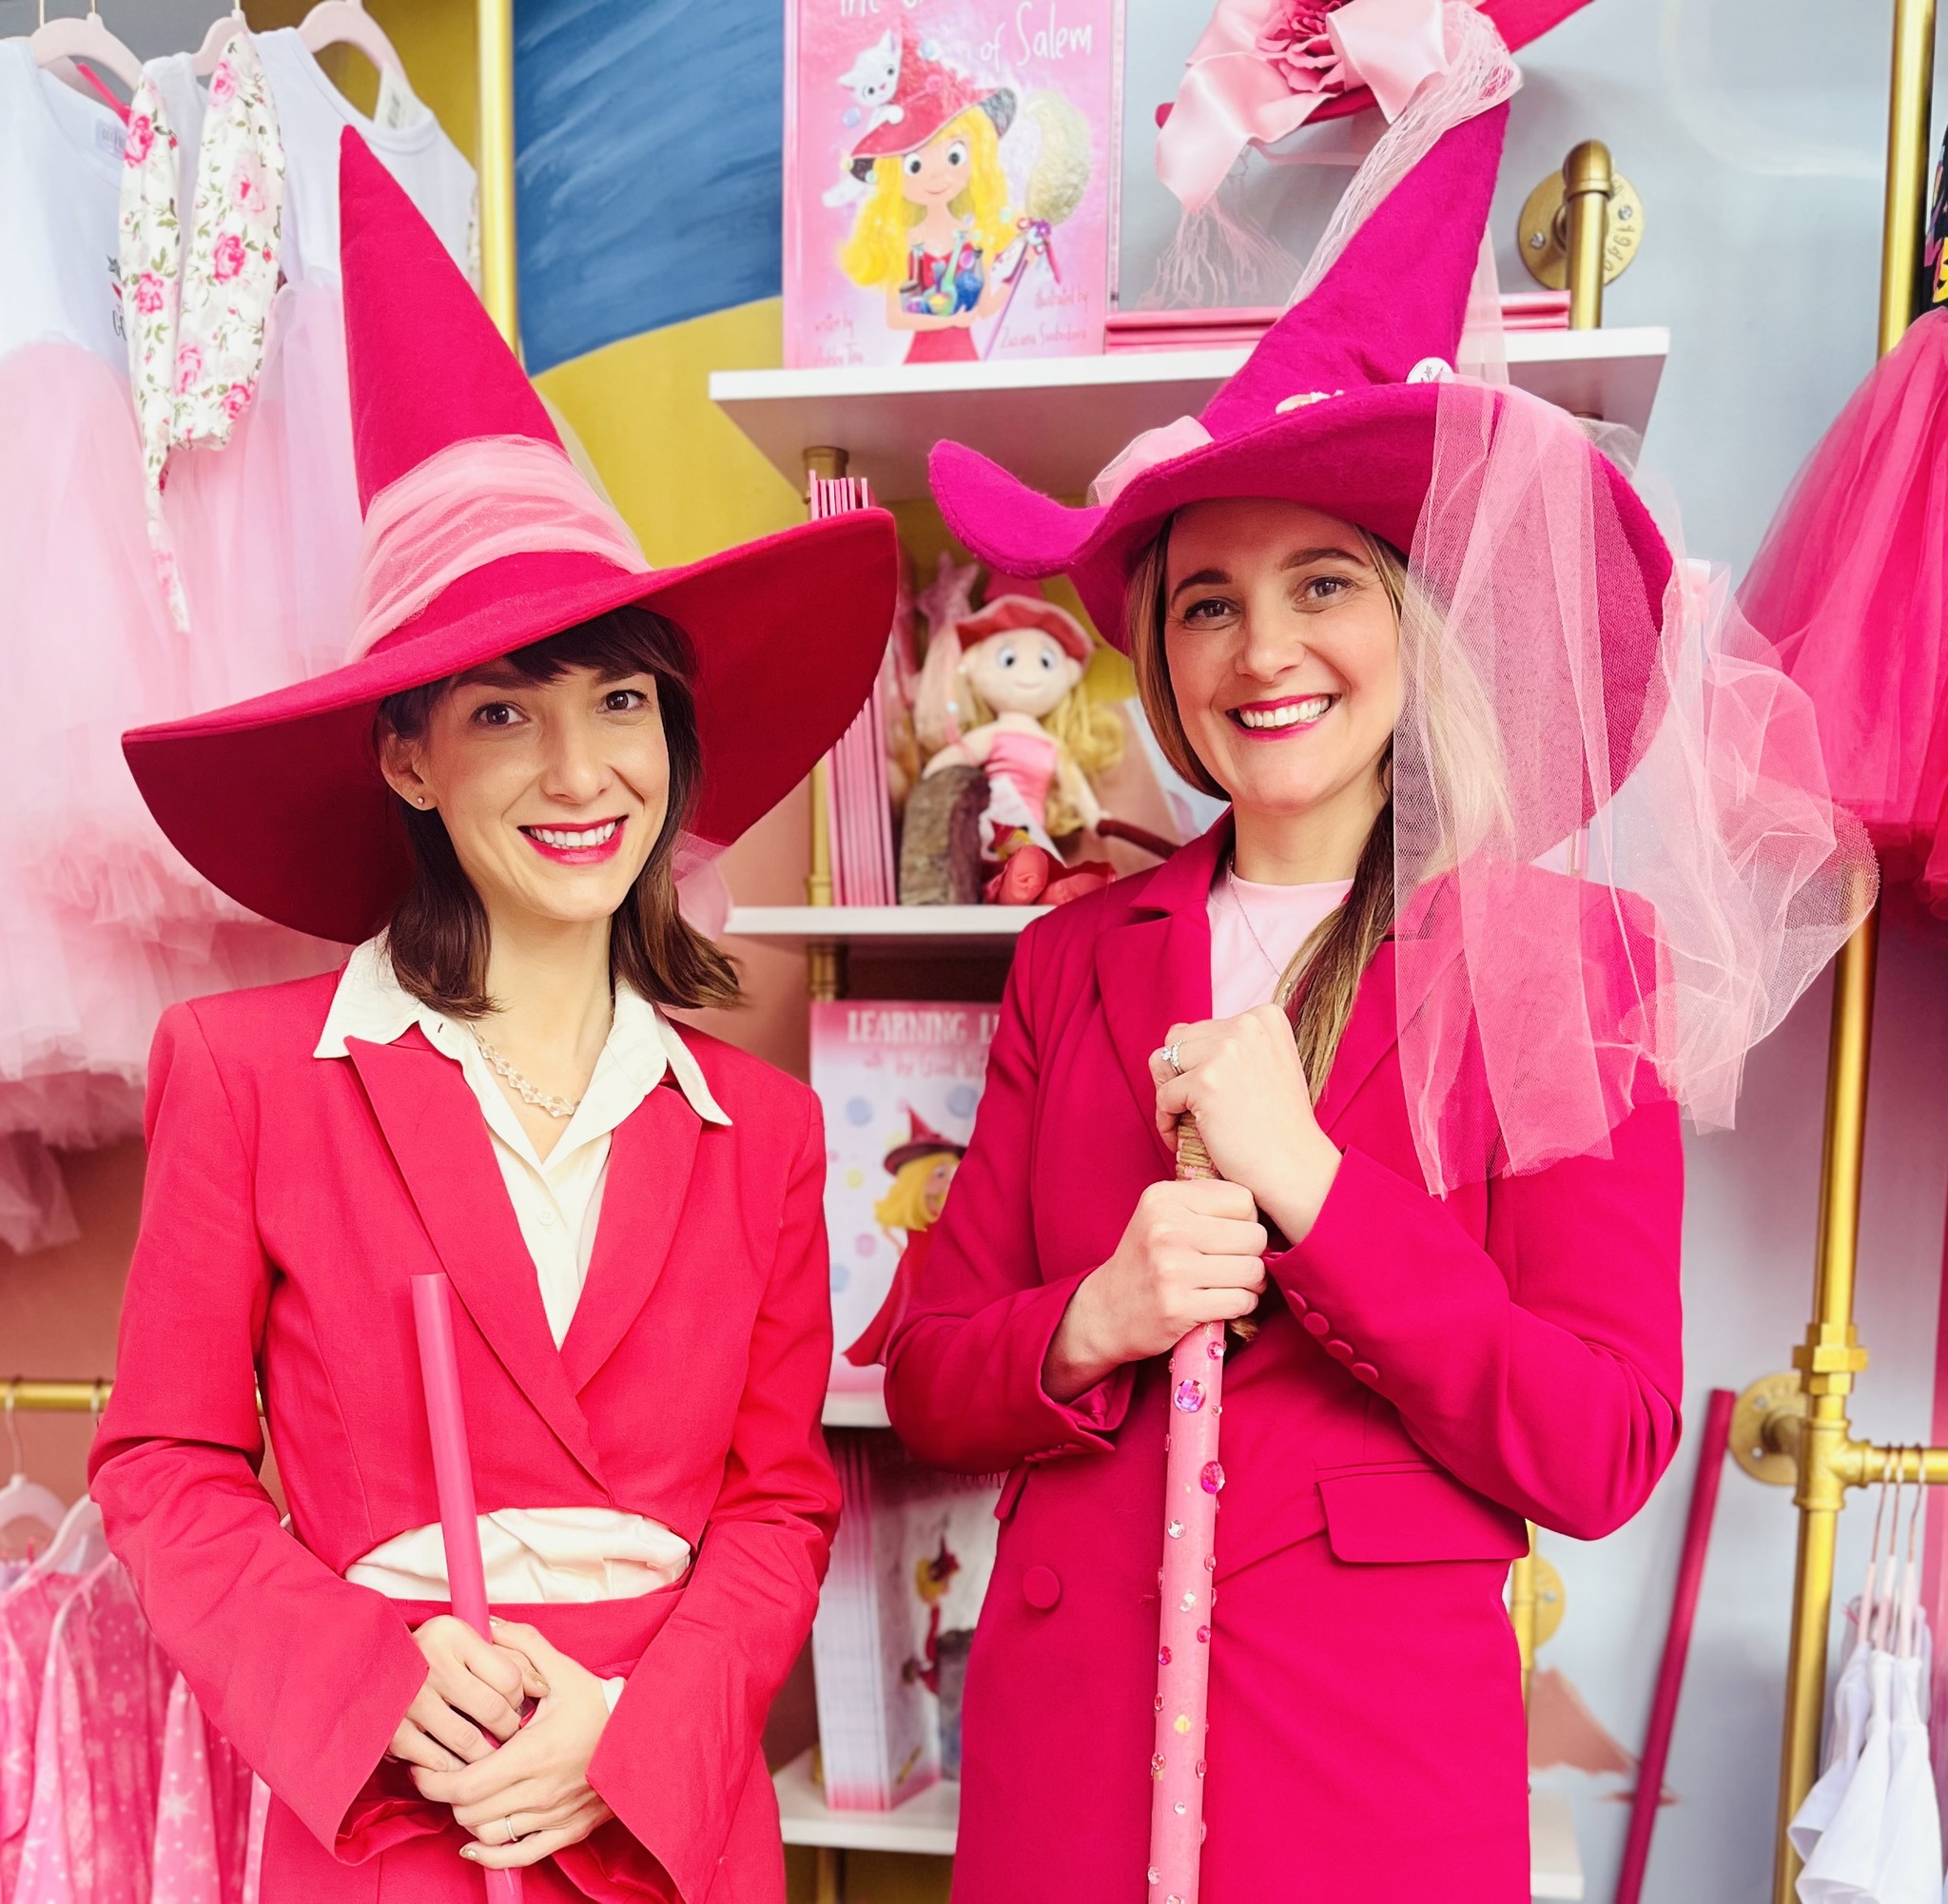 Two joy-filled people donning bright pink wizard outfits featuring pointed hats, complete with wands in hand.